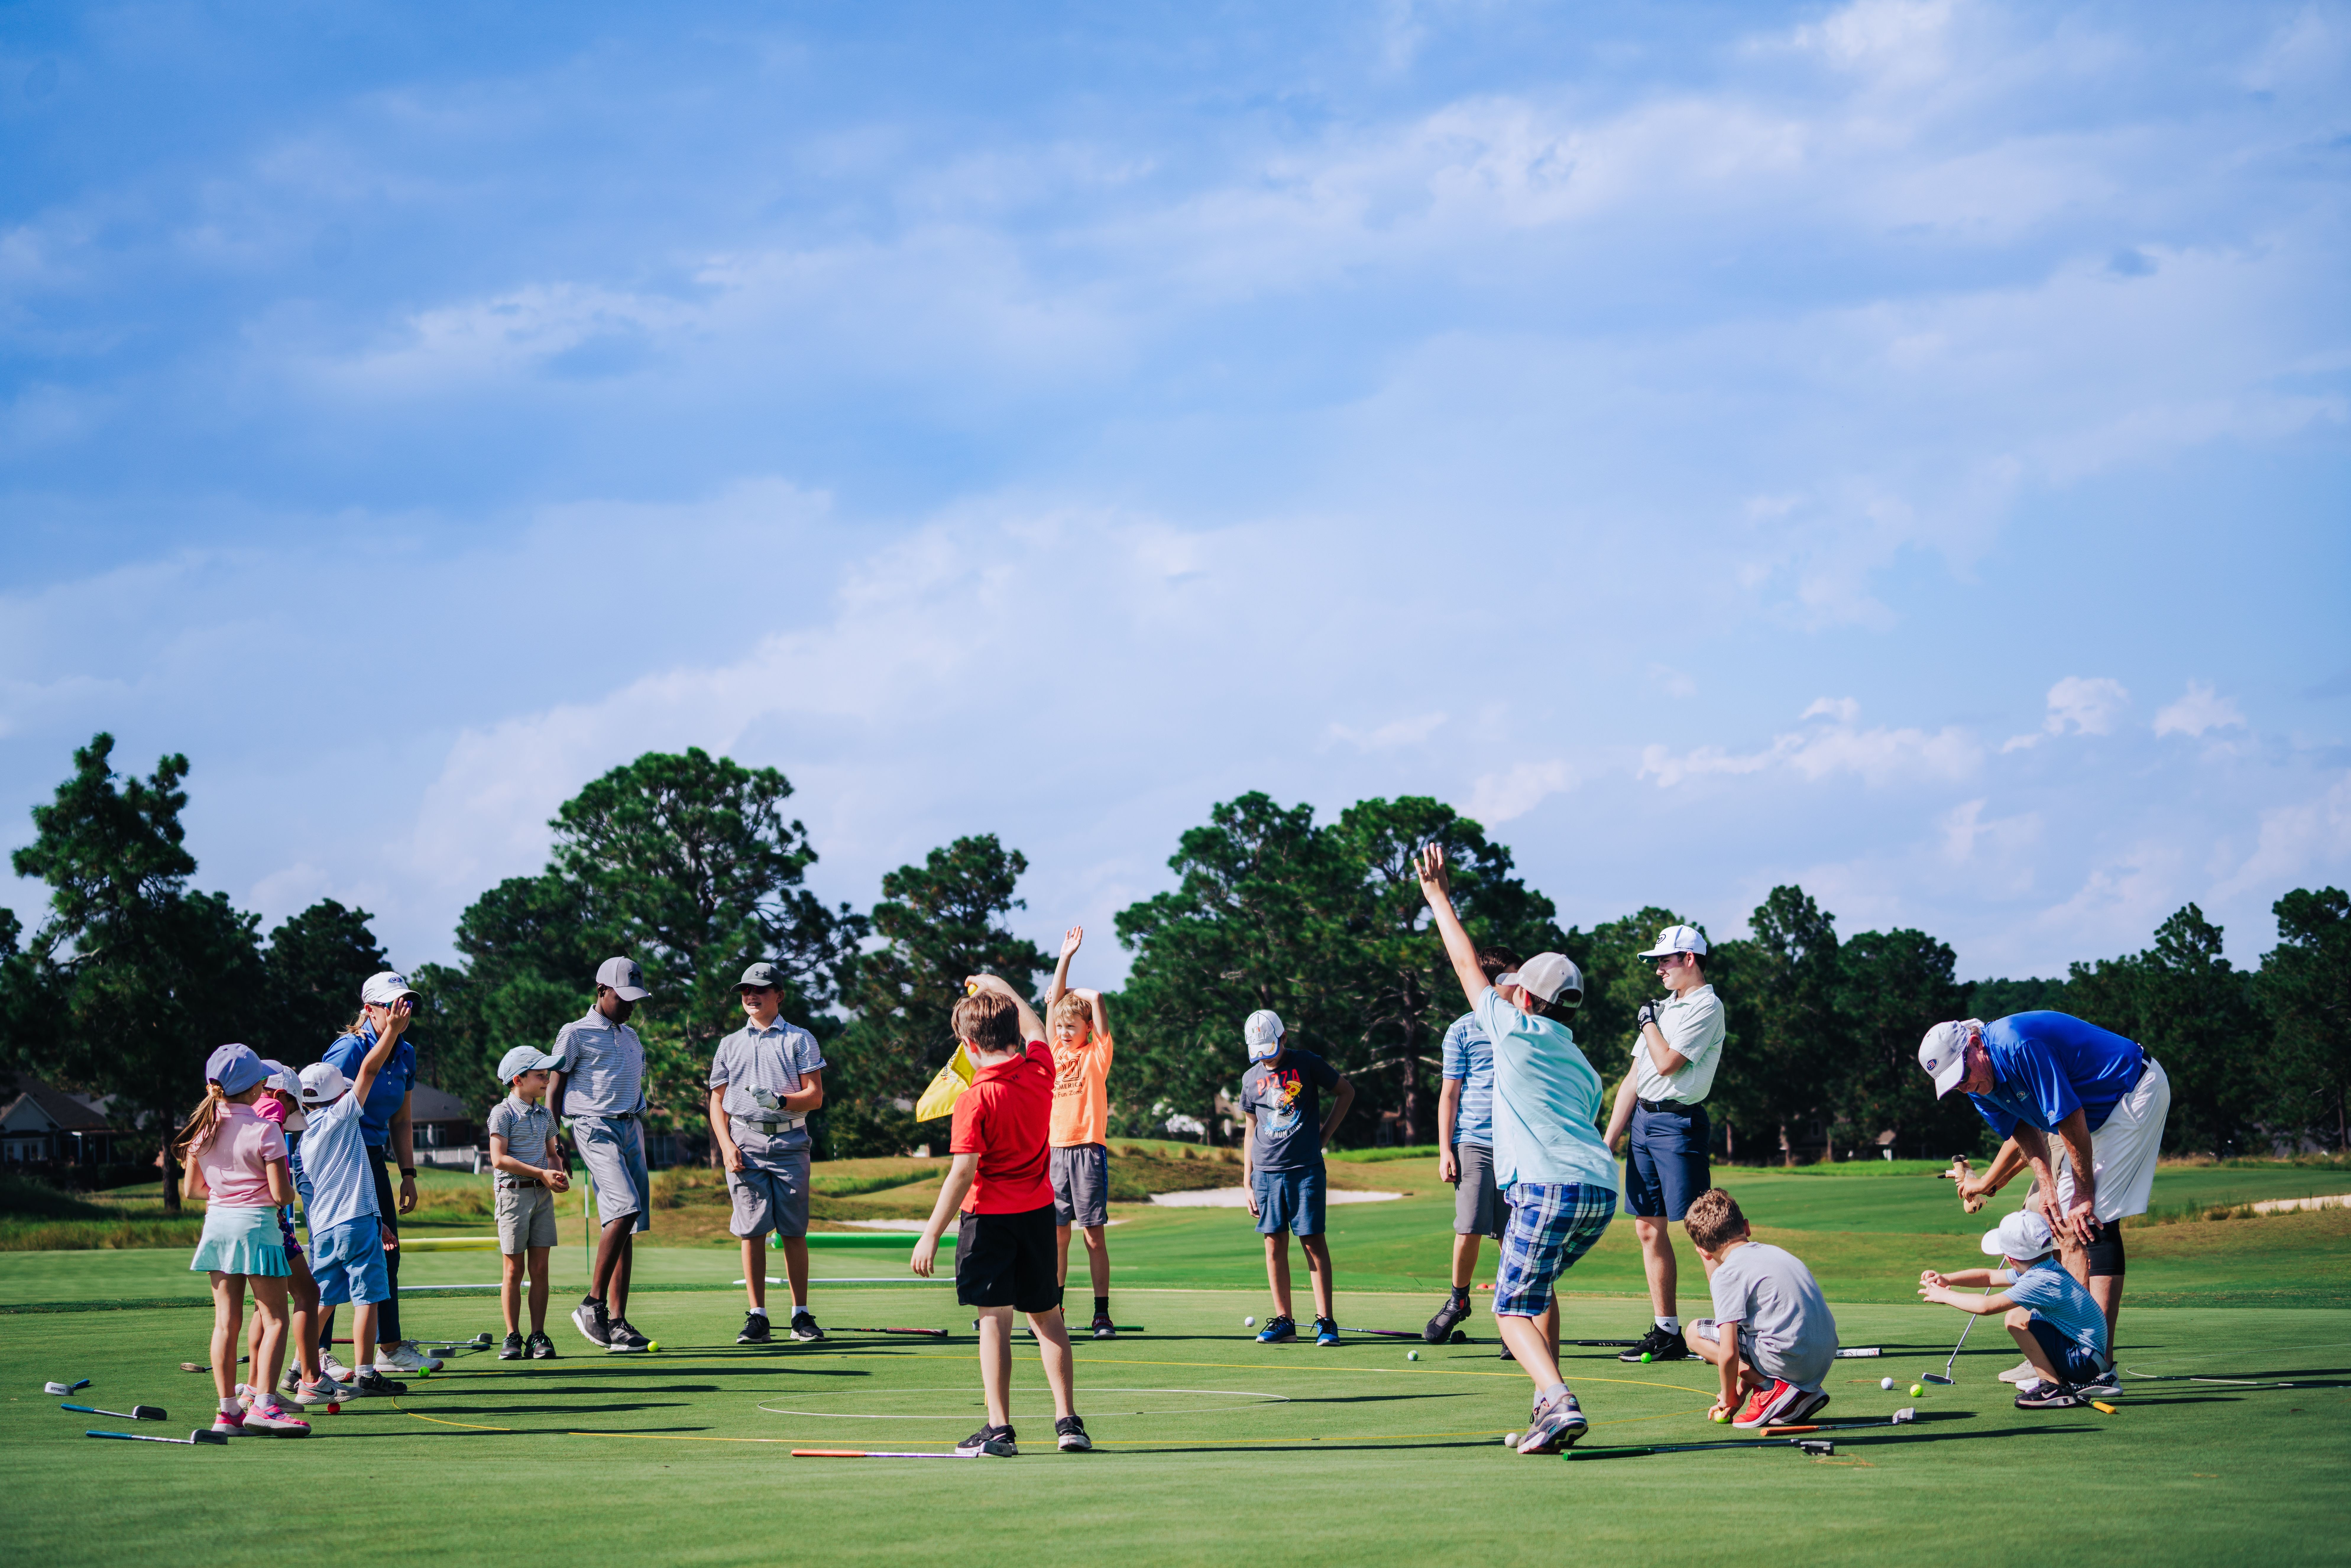 Three of the Best Junior Golf Games for Kids